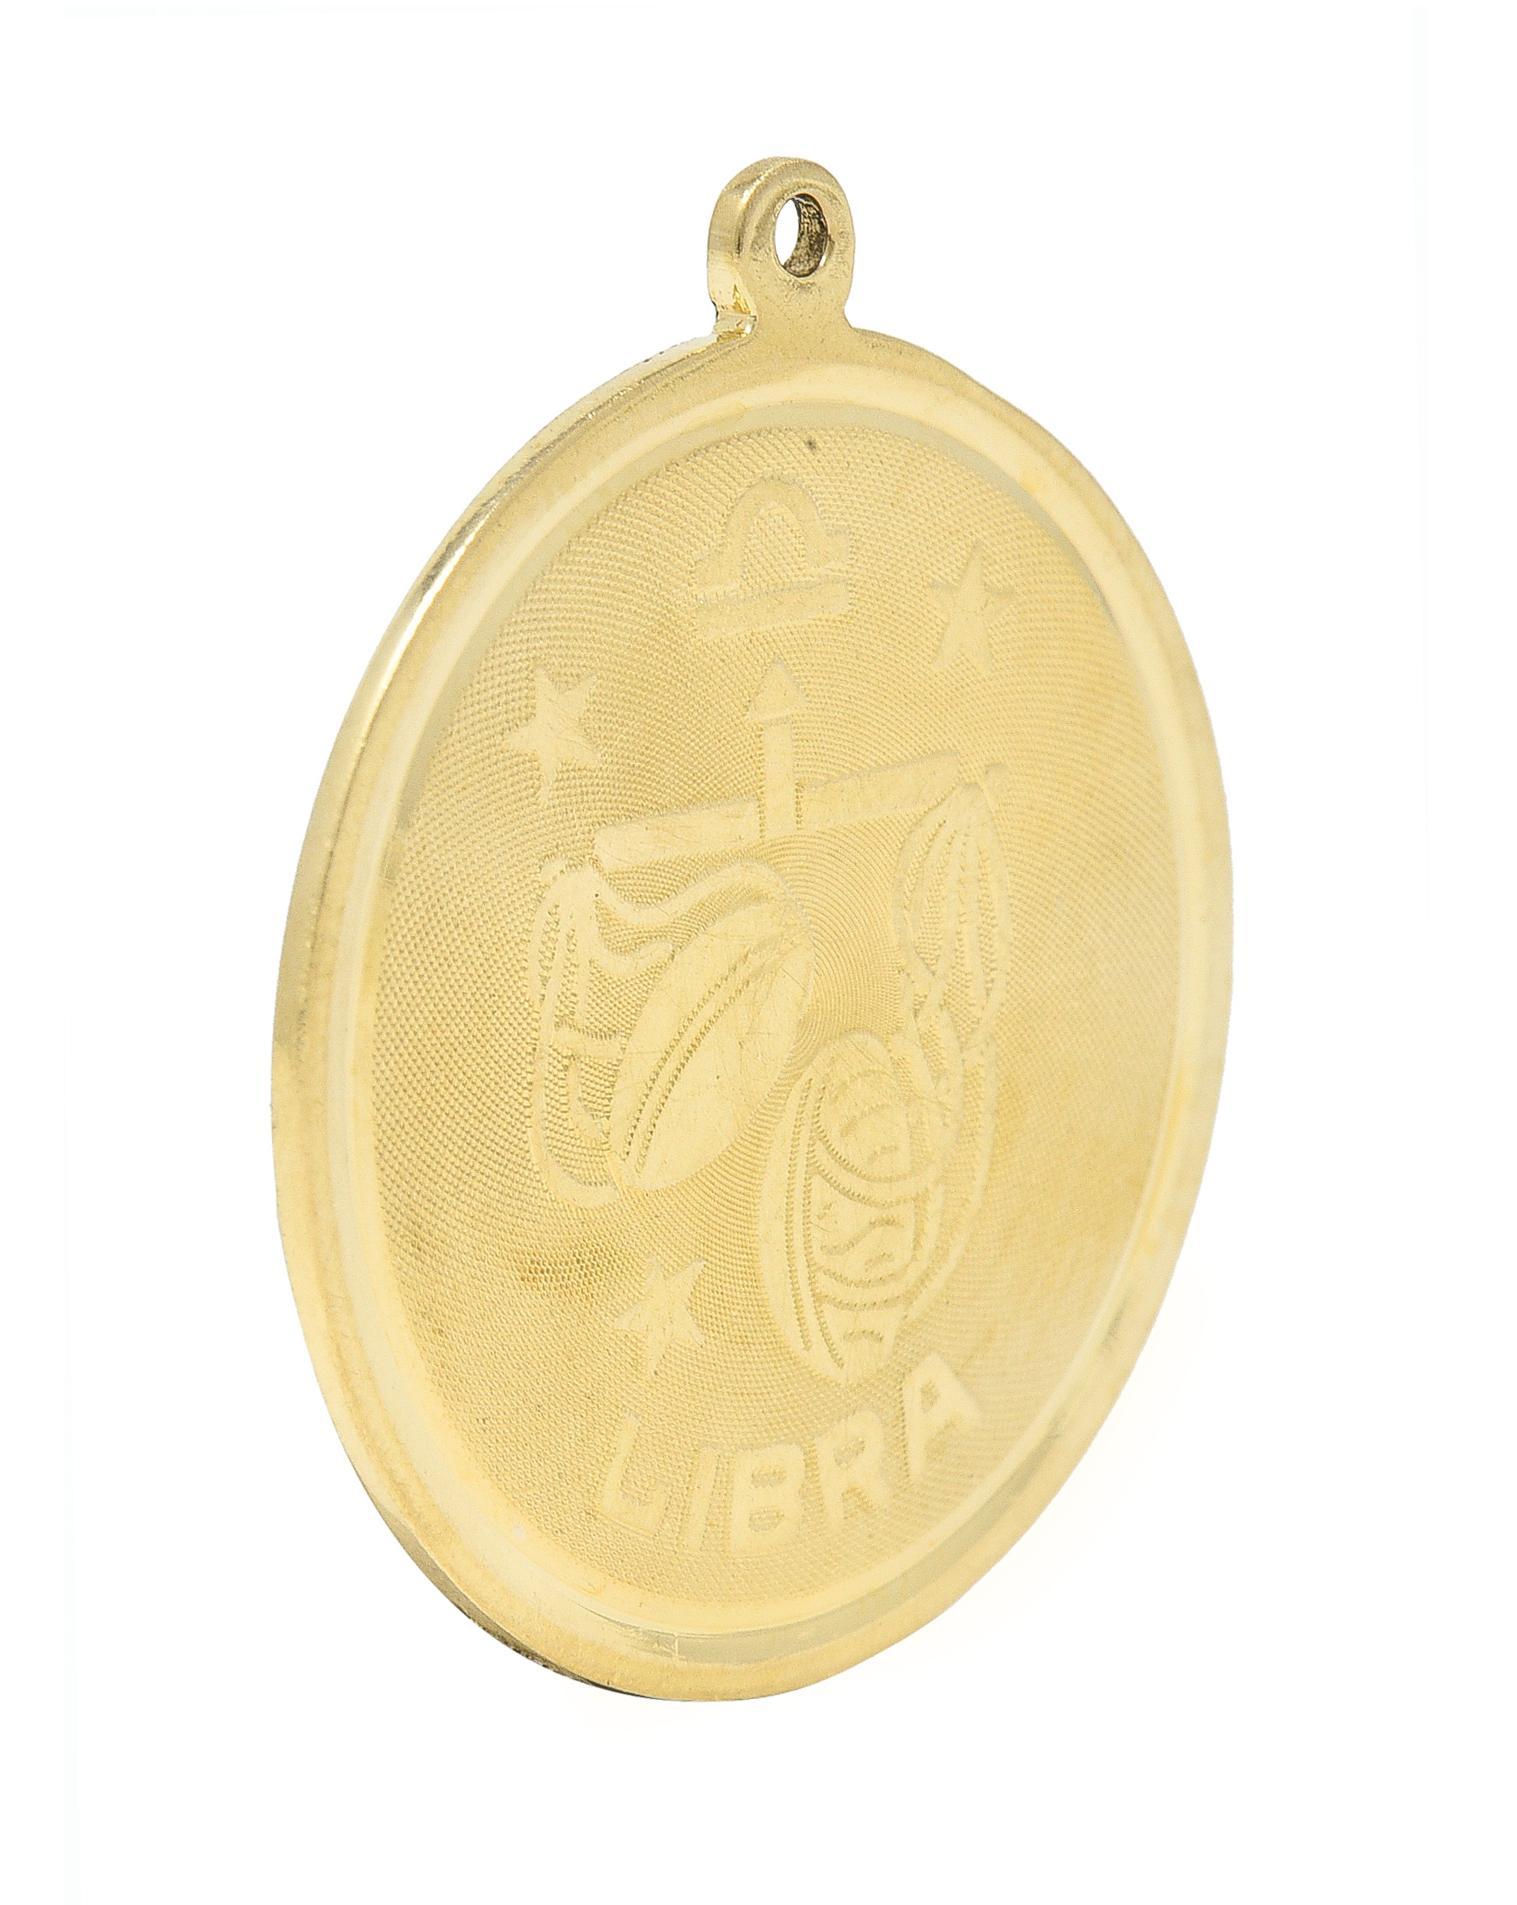 Designed as a round disk with high polished edges and a raised Libra zodiac motif
With the astrological Libra symbol, stylized scales, stars, and inscribed 'LIBRA'
With a finely cross-hatch textured recess
Completed by pierced bale
Tested as 14